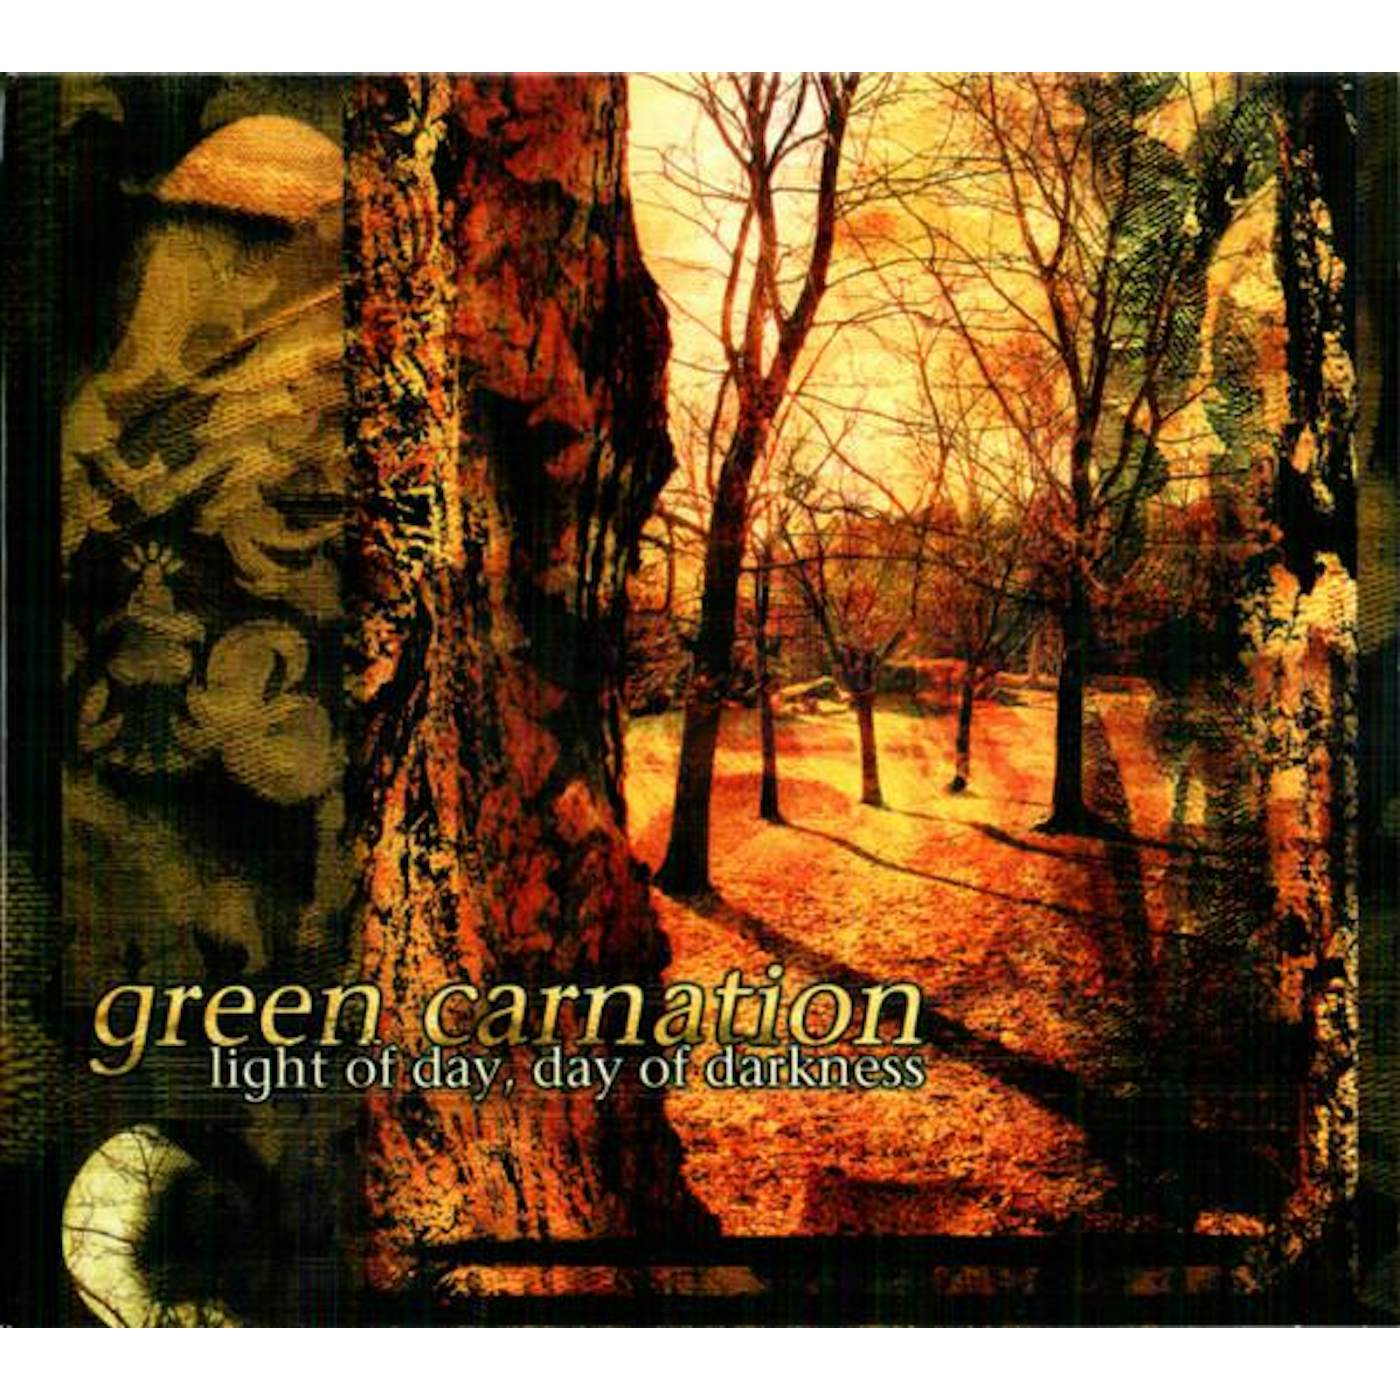 Green Carnation Light Of Day: Day Of Darkness CD